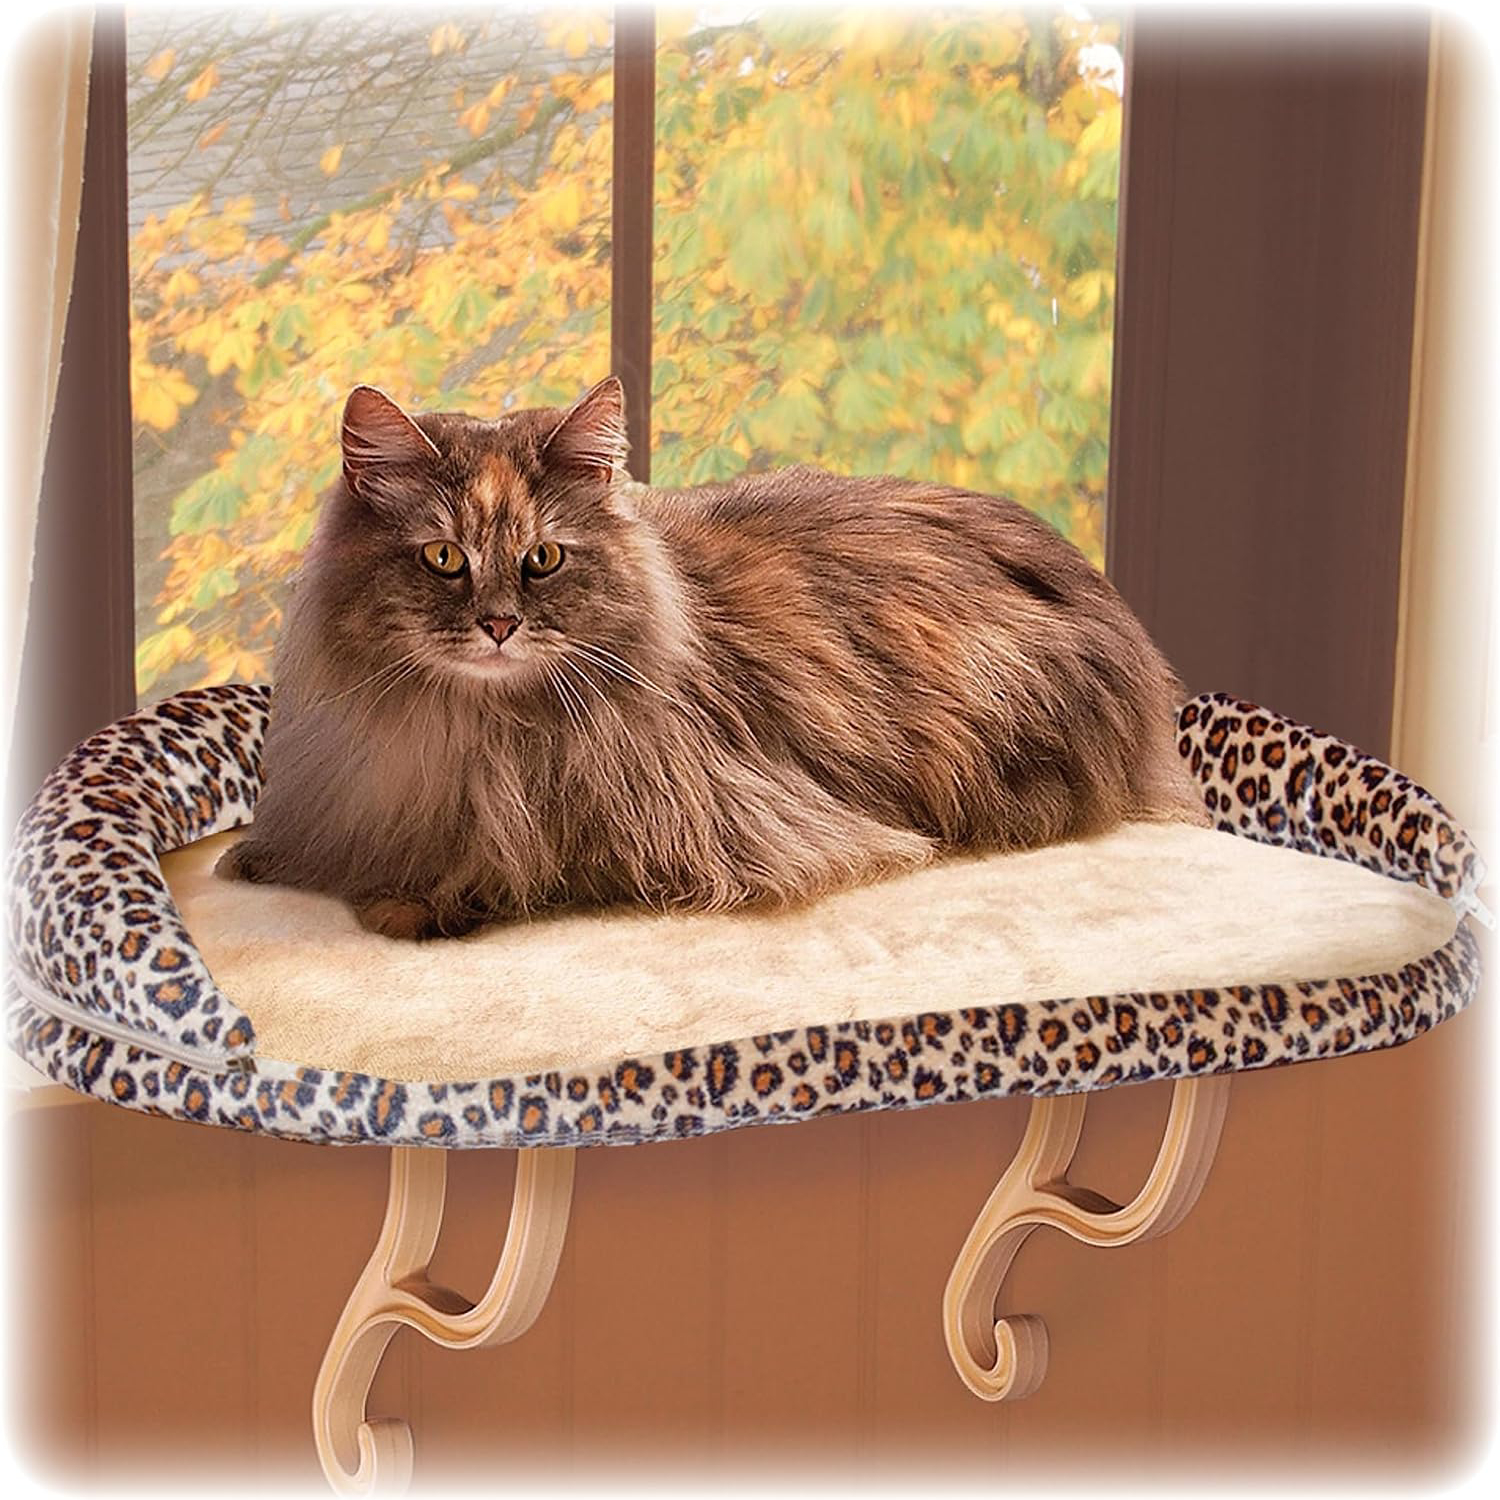 K&H Pet Products Deluxe Kitty Sill w_ Bolster Cat Window Bed, Cat Window Perch for Large Cats, Cat Window Hammock, Cat Window Seat, Window Cat Bed, Cat Perch Cat Hammock –Tan Leopard Print new